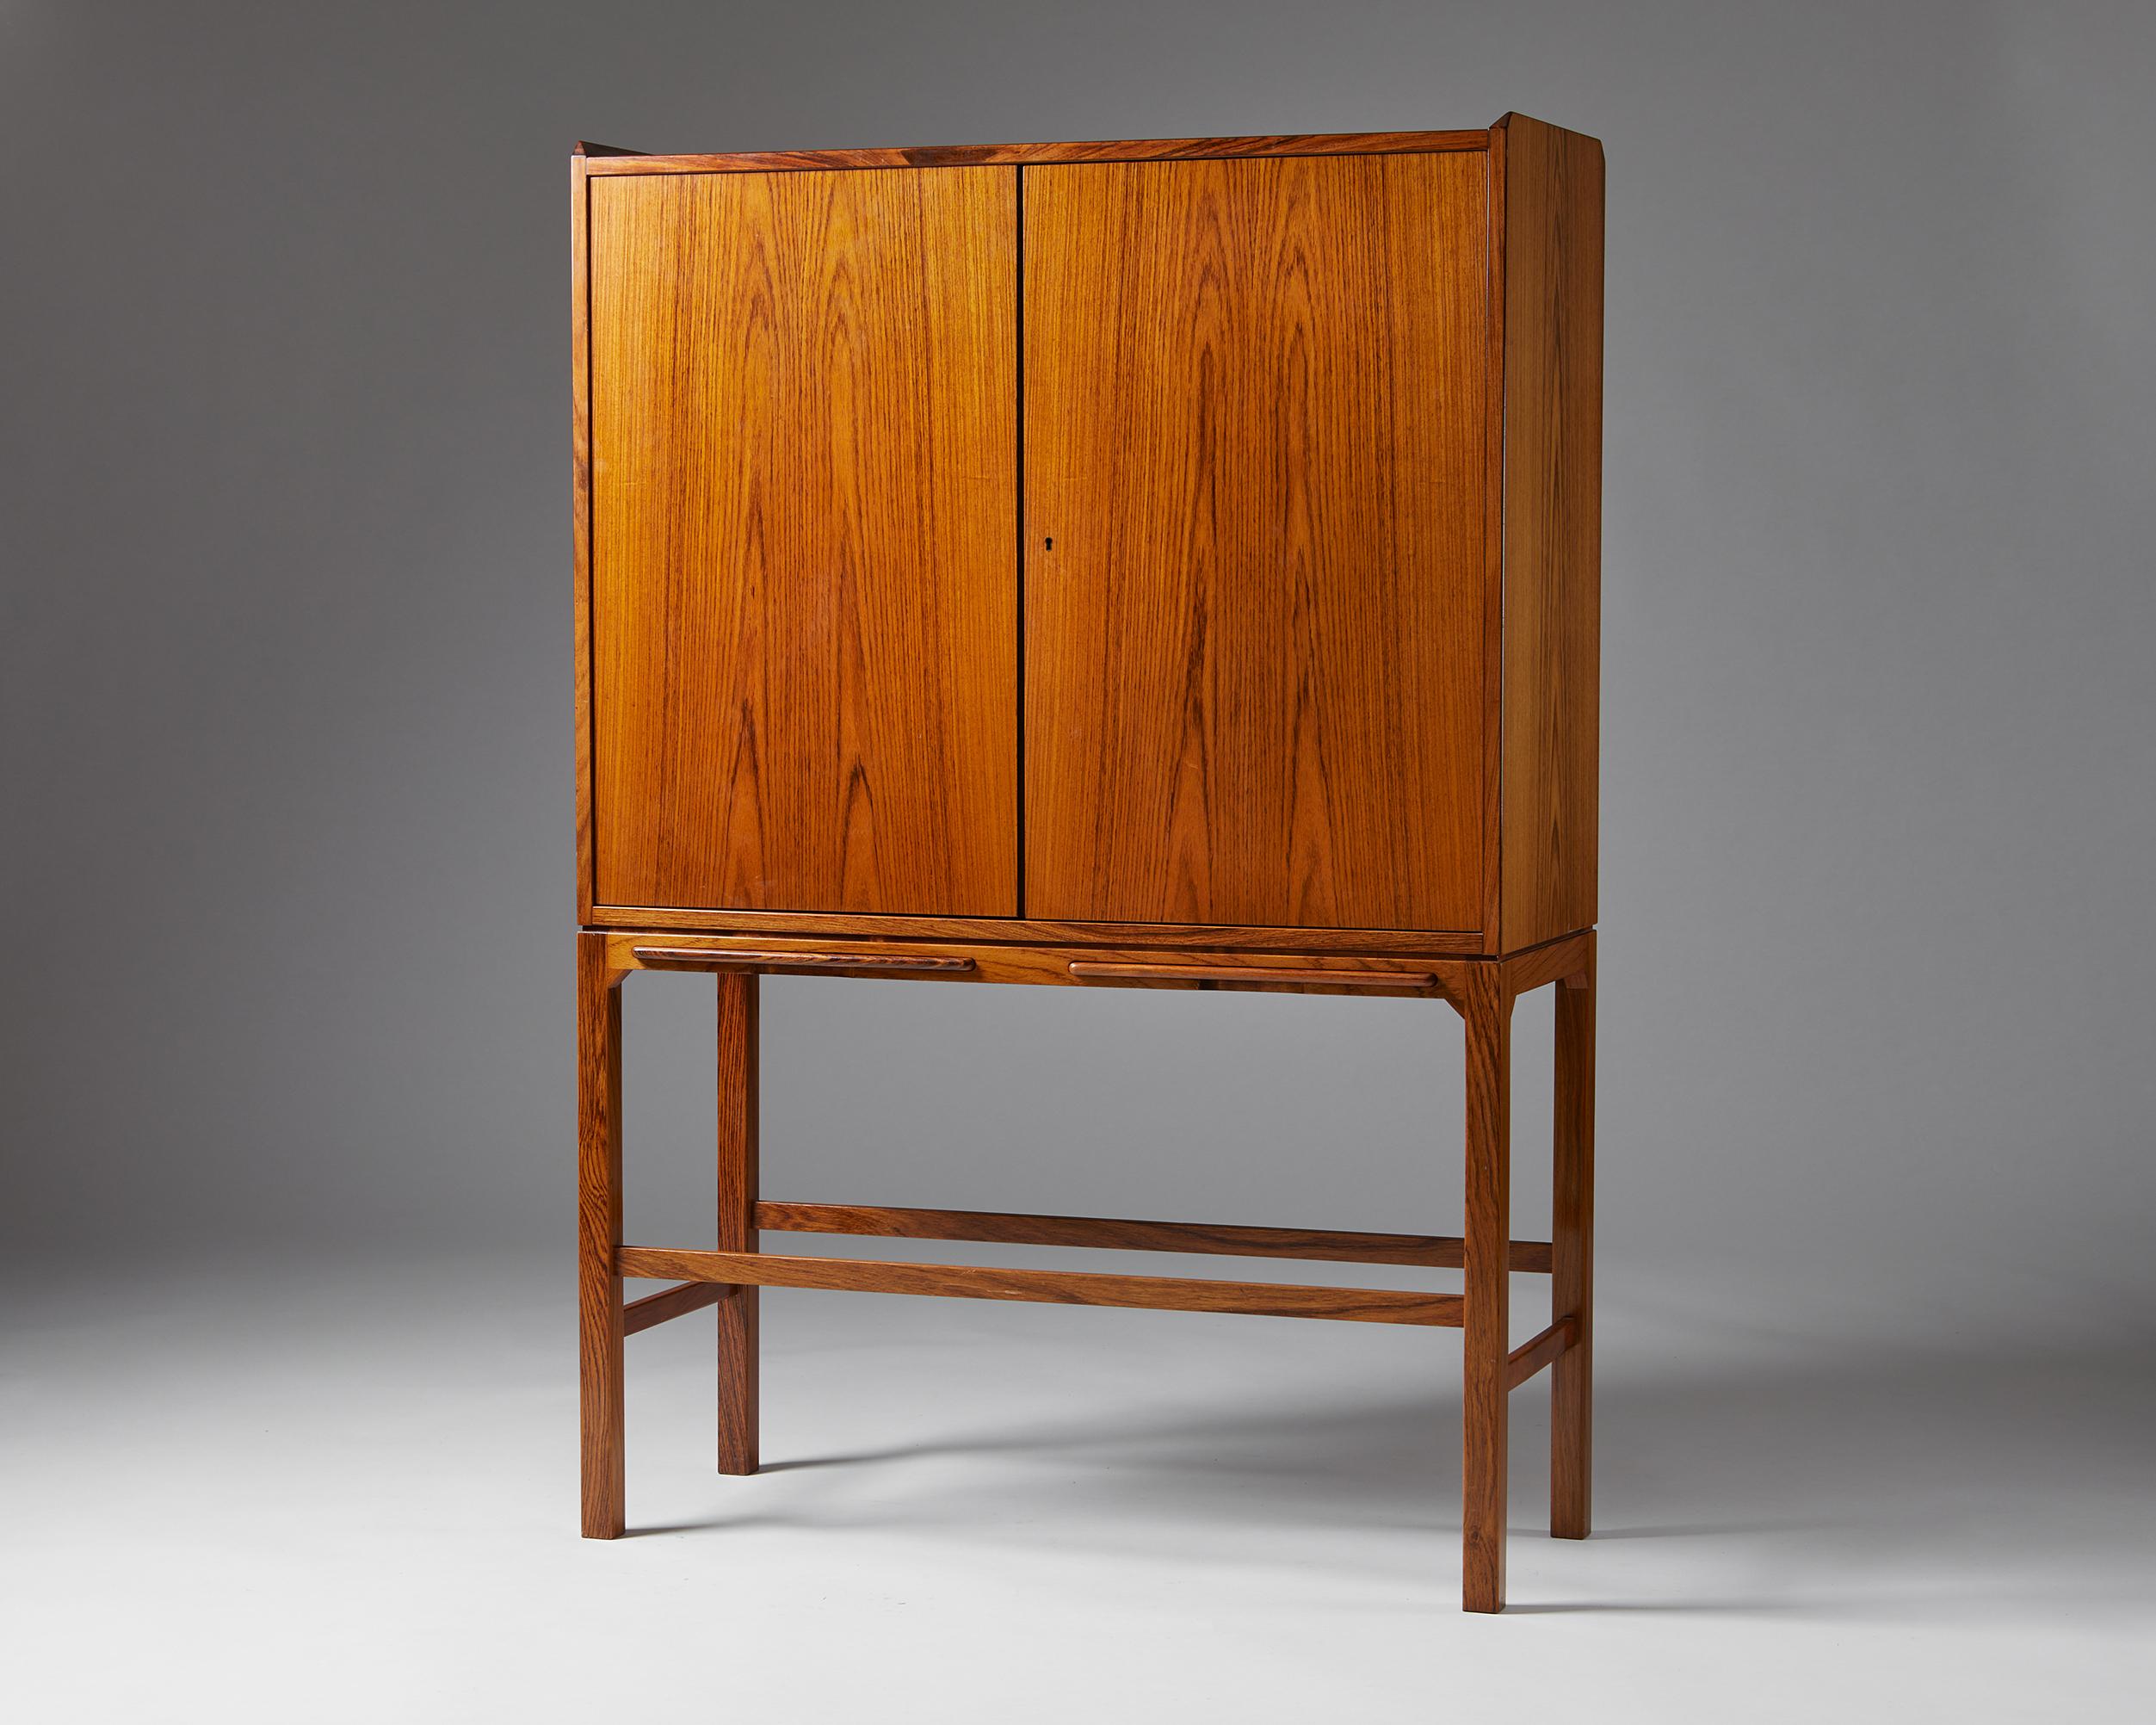 Bar cabinet, anonymous,
Sweden. 1960s.
Rosewood and mirror glass.

This elegant anonymous bar cabinet is an exquisite example of Scandinavian cabinetmaking. The pattern created by the book matched rosewood veneer on the cabinet’s top, front, and